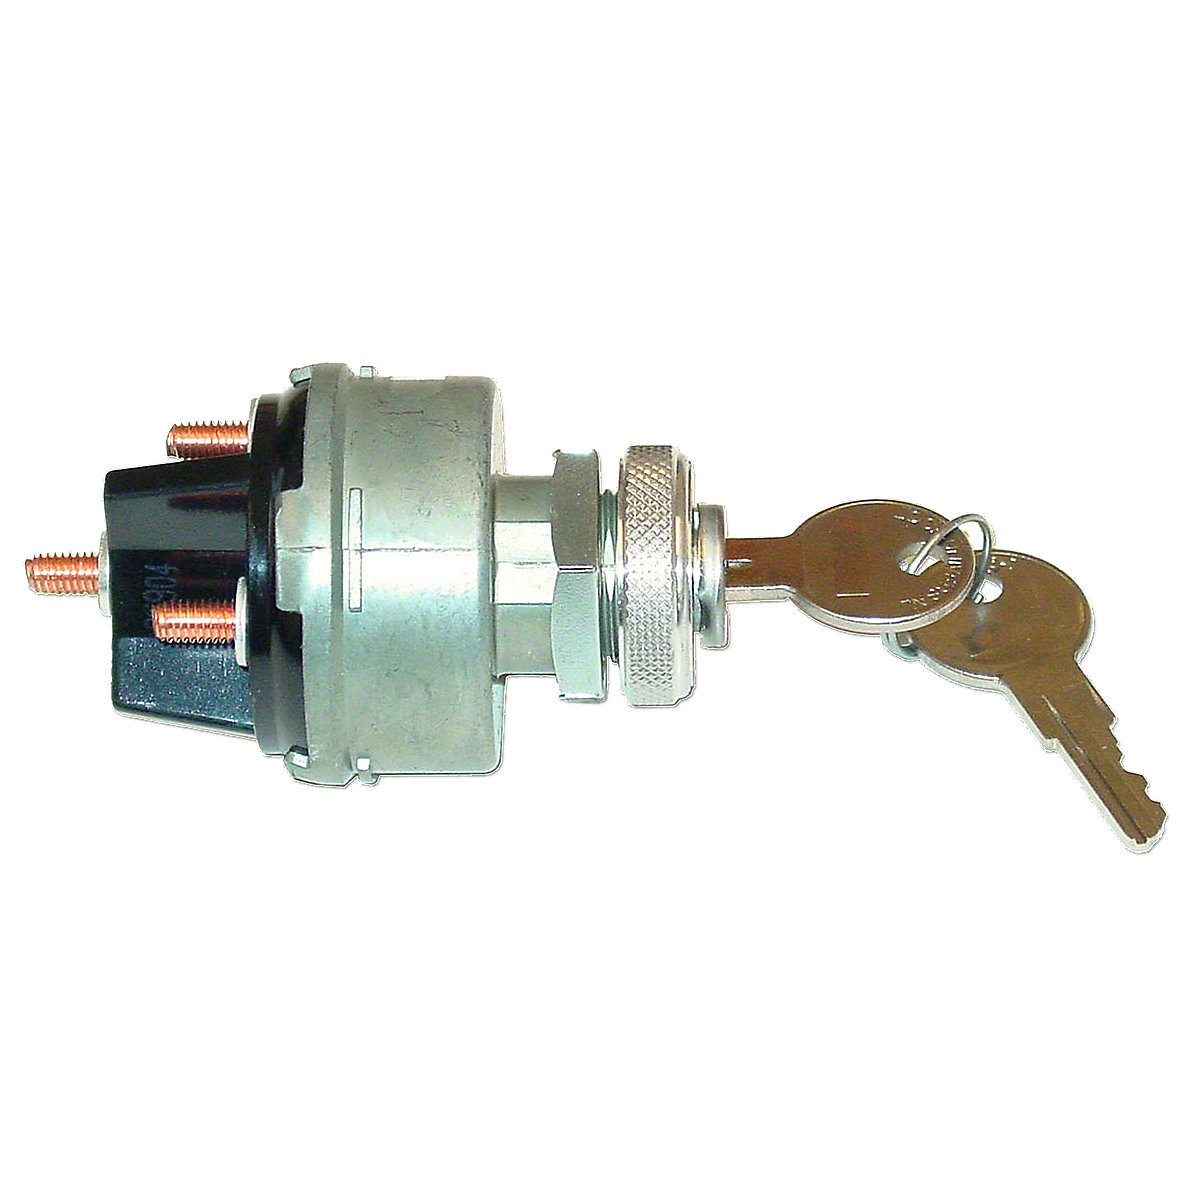 Ignition Switch With Key For Allis Chalmers Tractors.